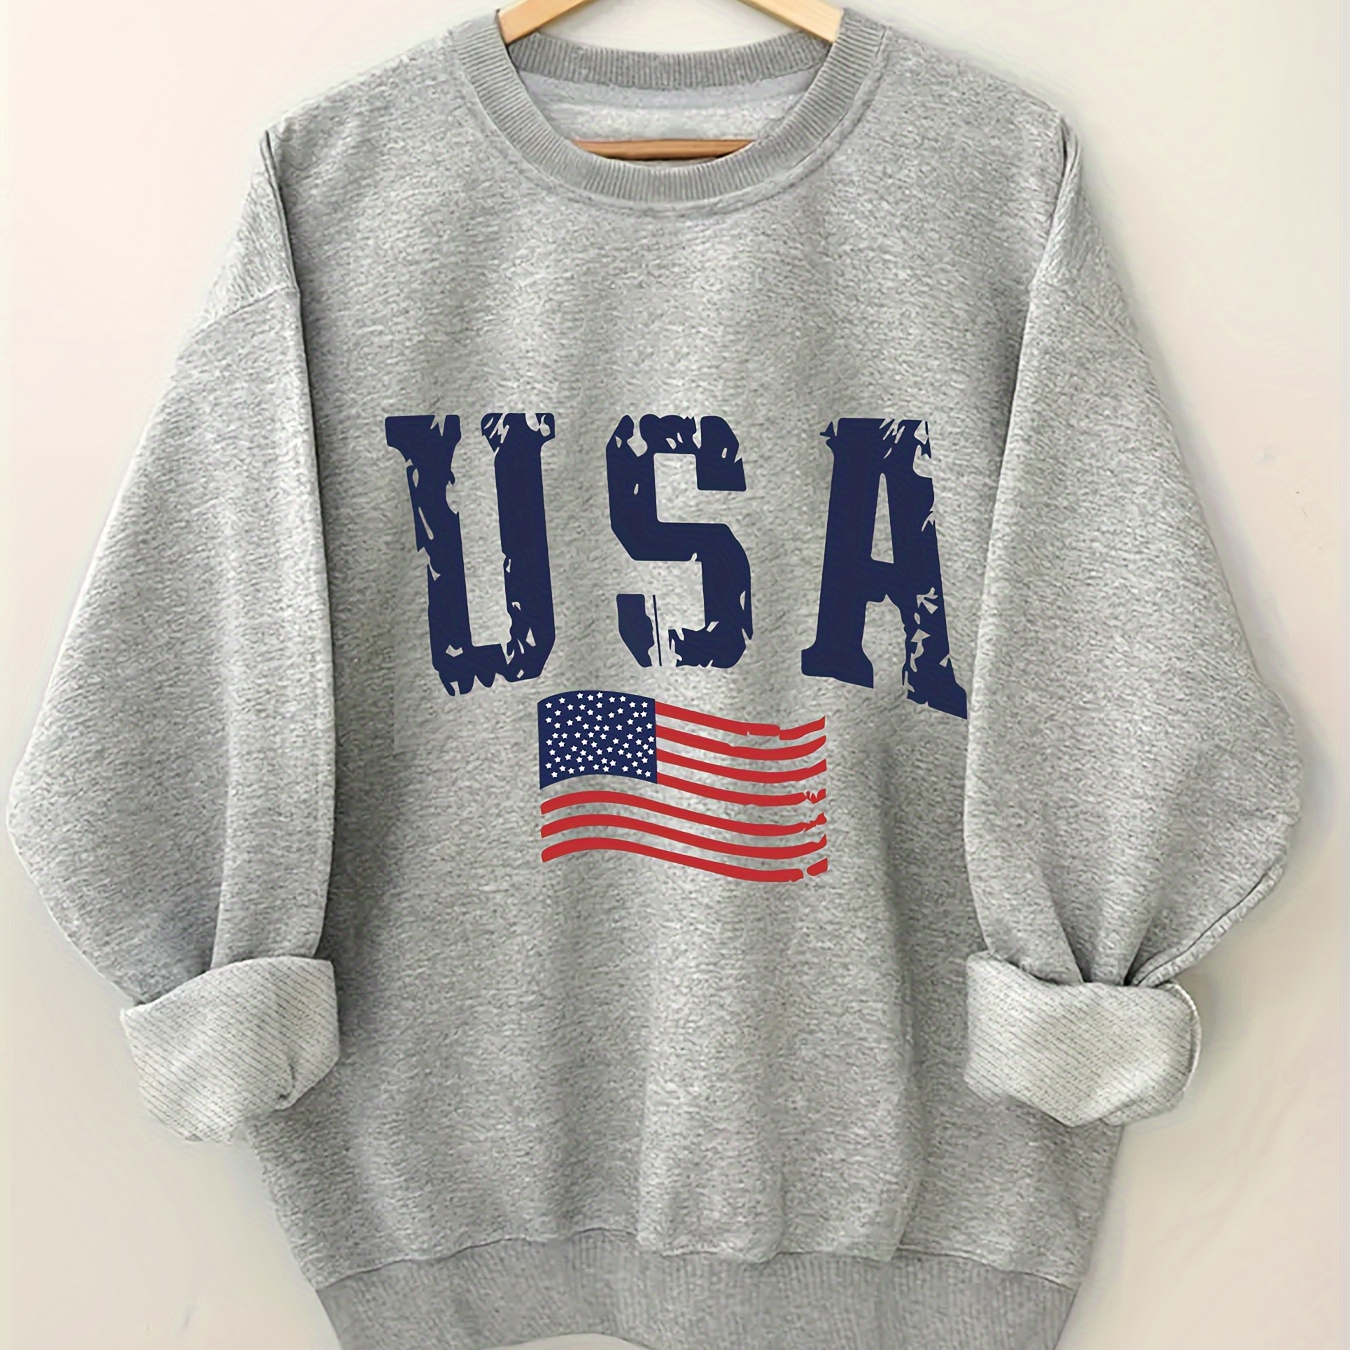 

Plus Size Usa Print Pullover Sweatshirt, Casual Long Sleeve Crew Neck Sweatshirt For Fall & Spring, Women's Plus Size Clothing